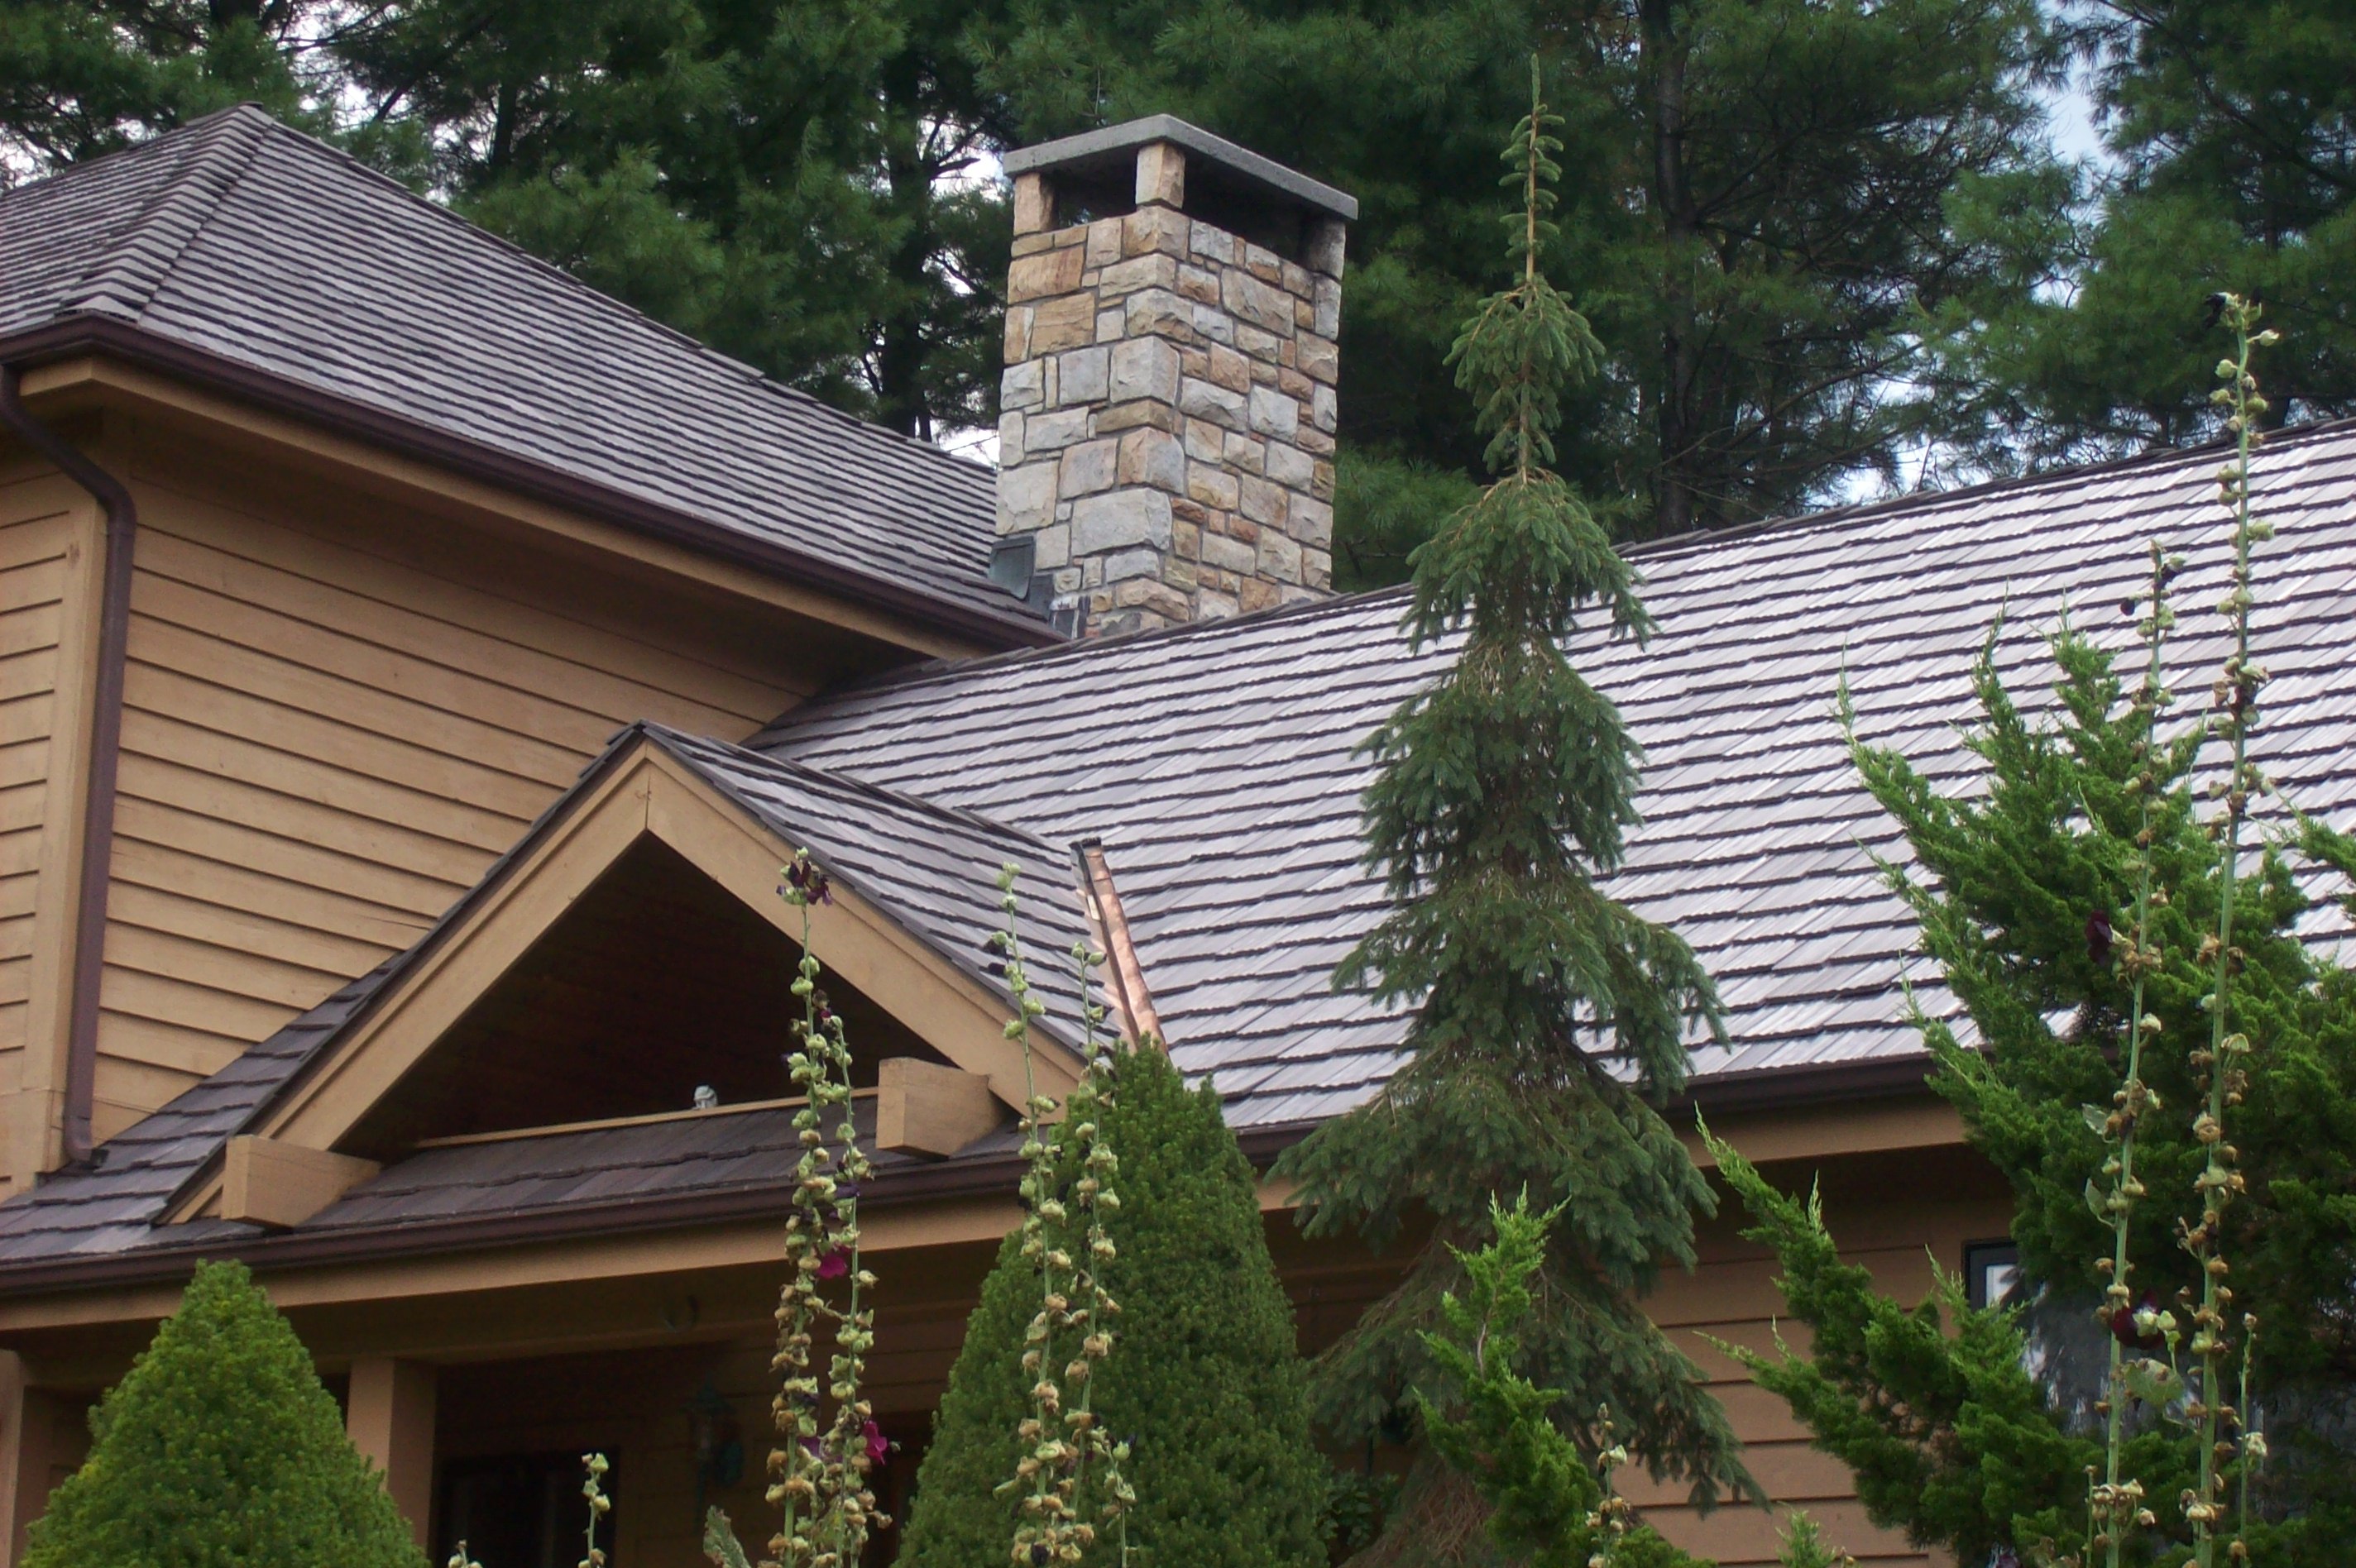 DaVinci polymer roof installed by Stacy Stines Roofing.